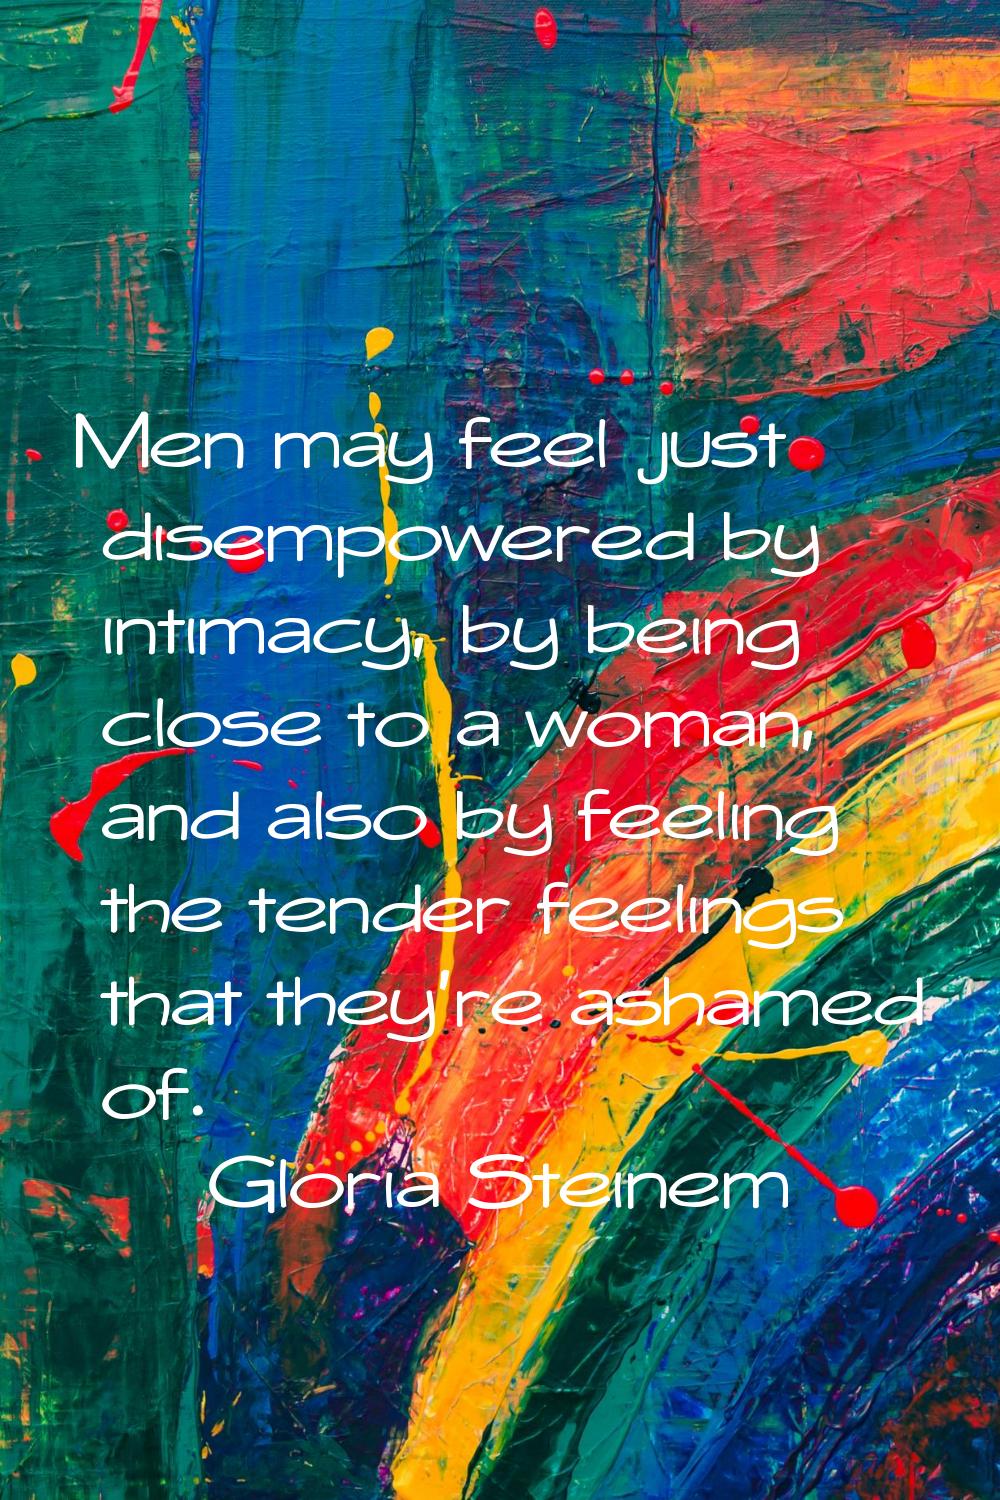 Men may feel just disempowered by intimacy, by being close to a woman, and also by feeling the tend